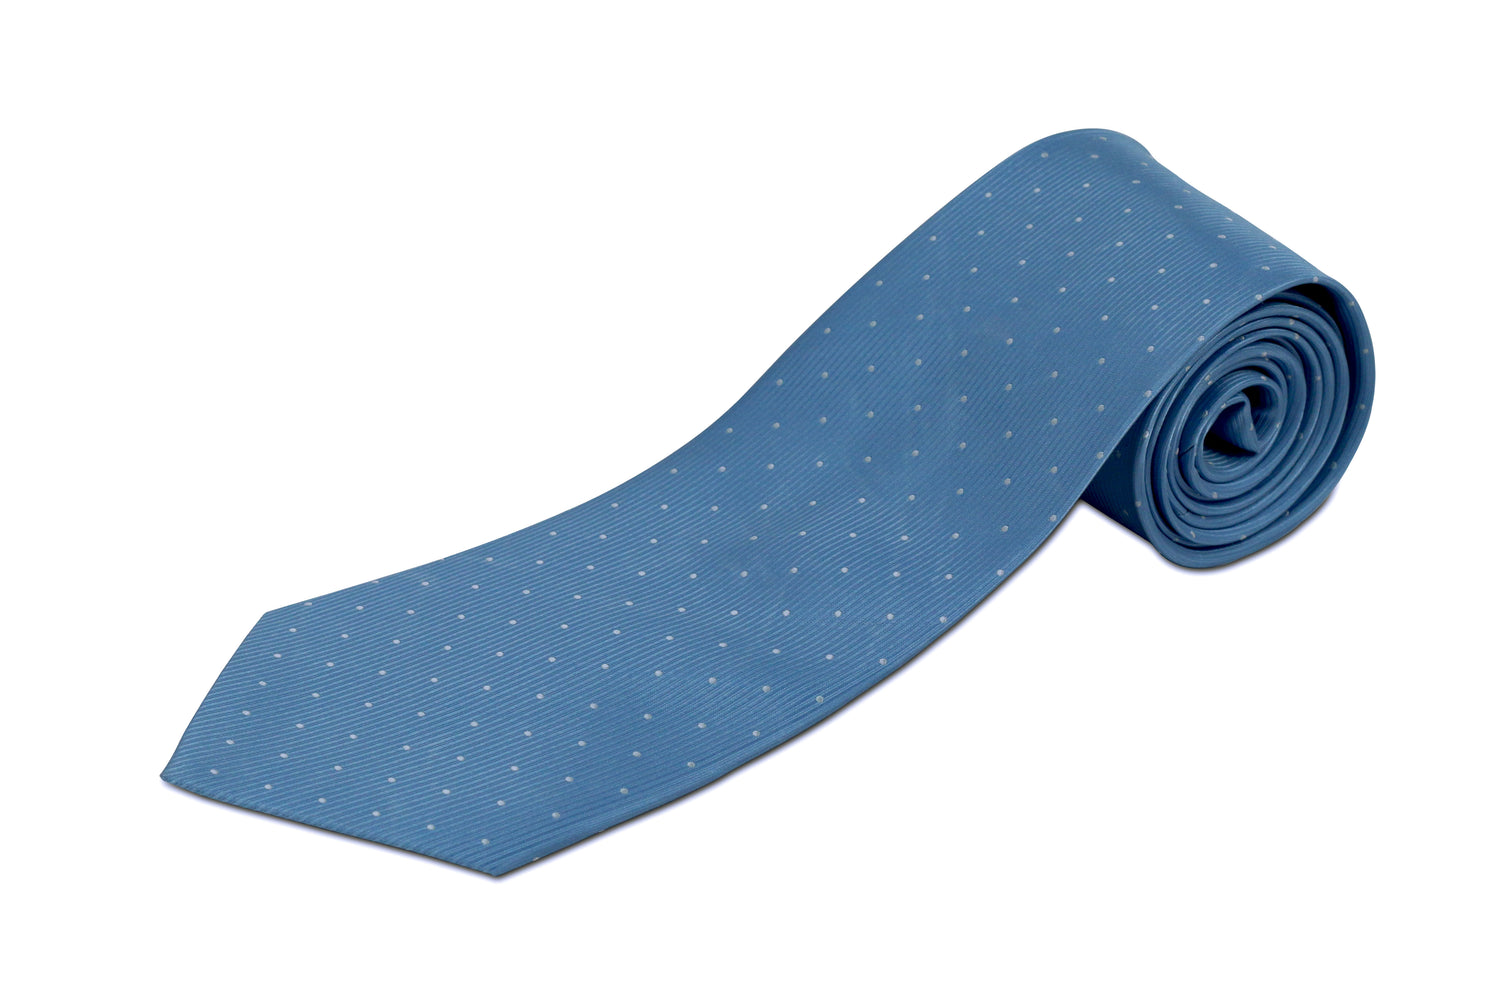 100% Silk Extra Long Tie with Dots for Big and Tall Men